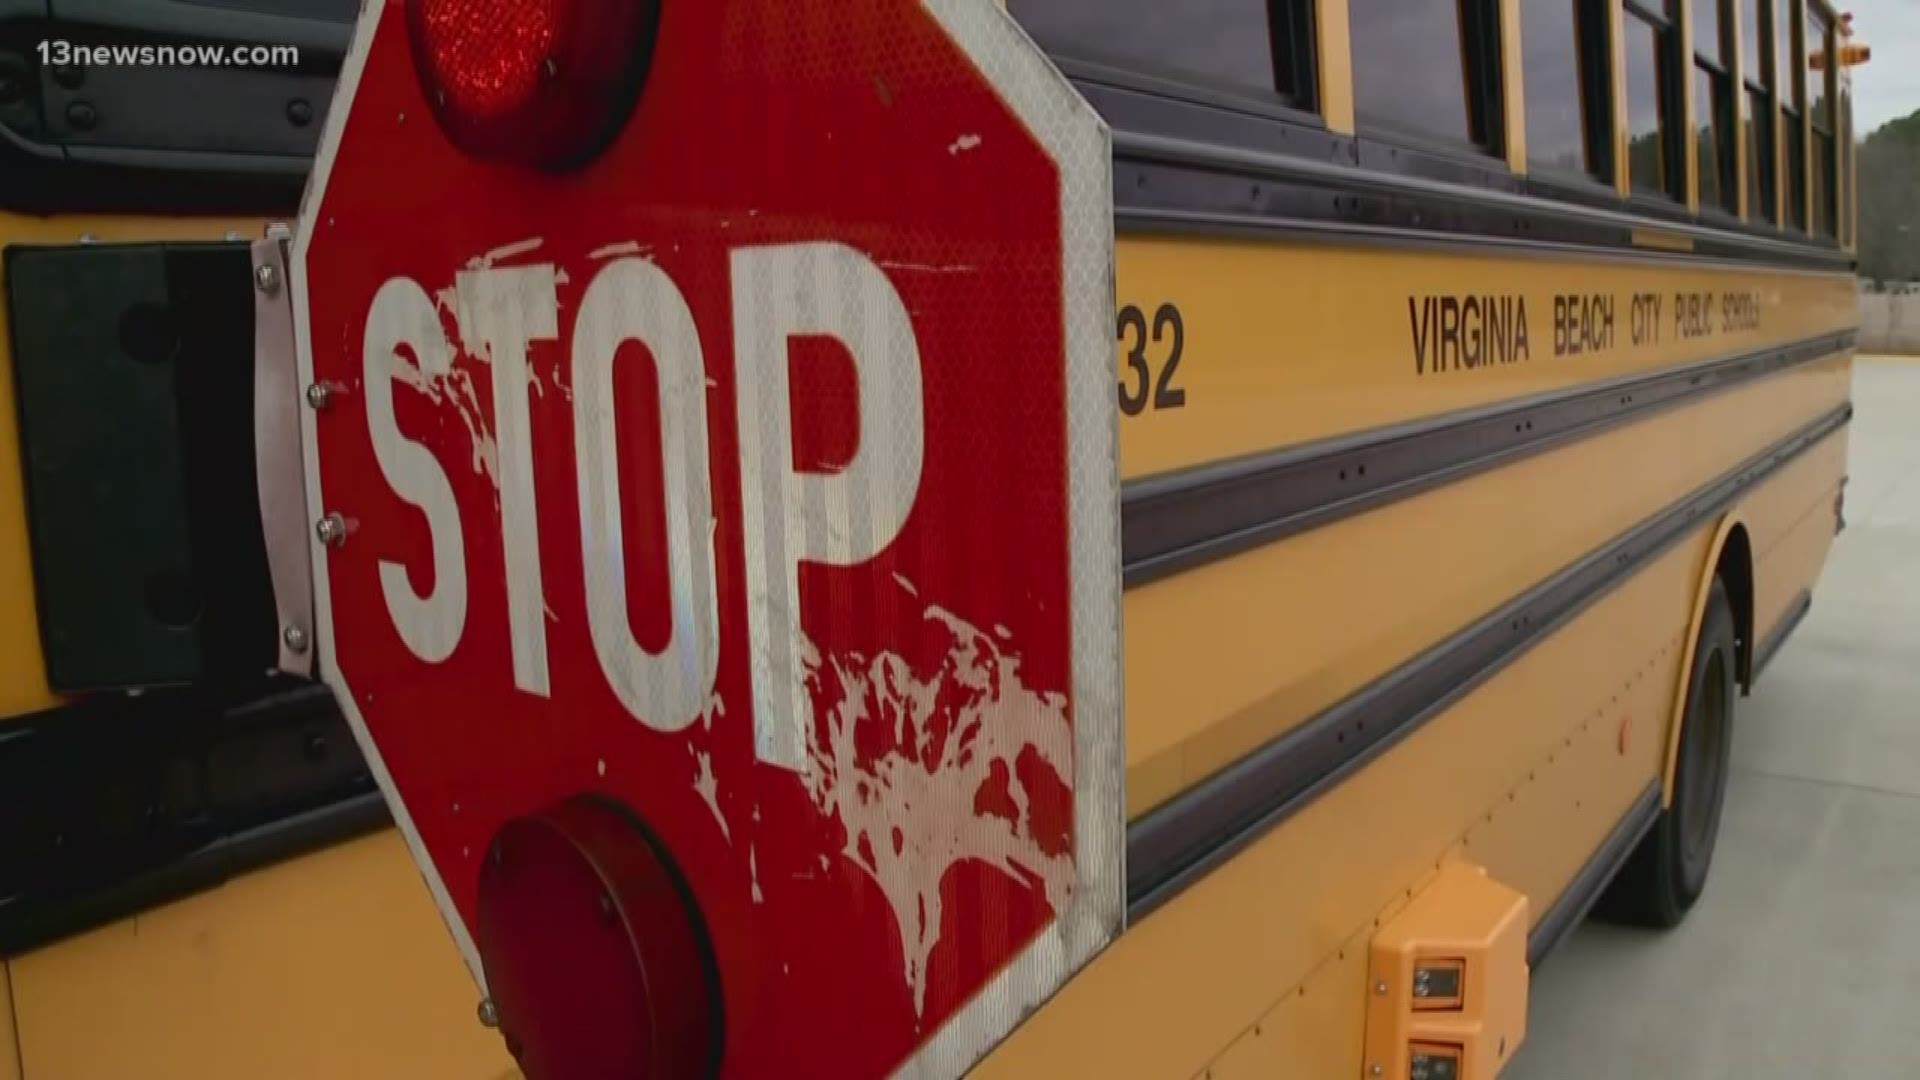 While city council is on board with the use of school buses, the school board has to approve the use of the buses.